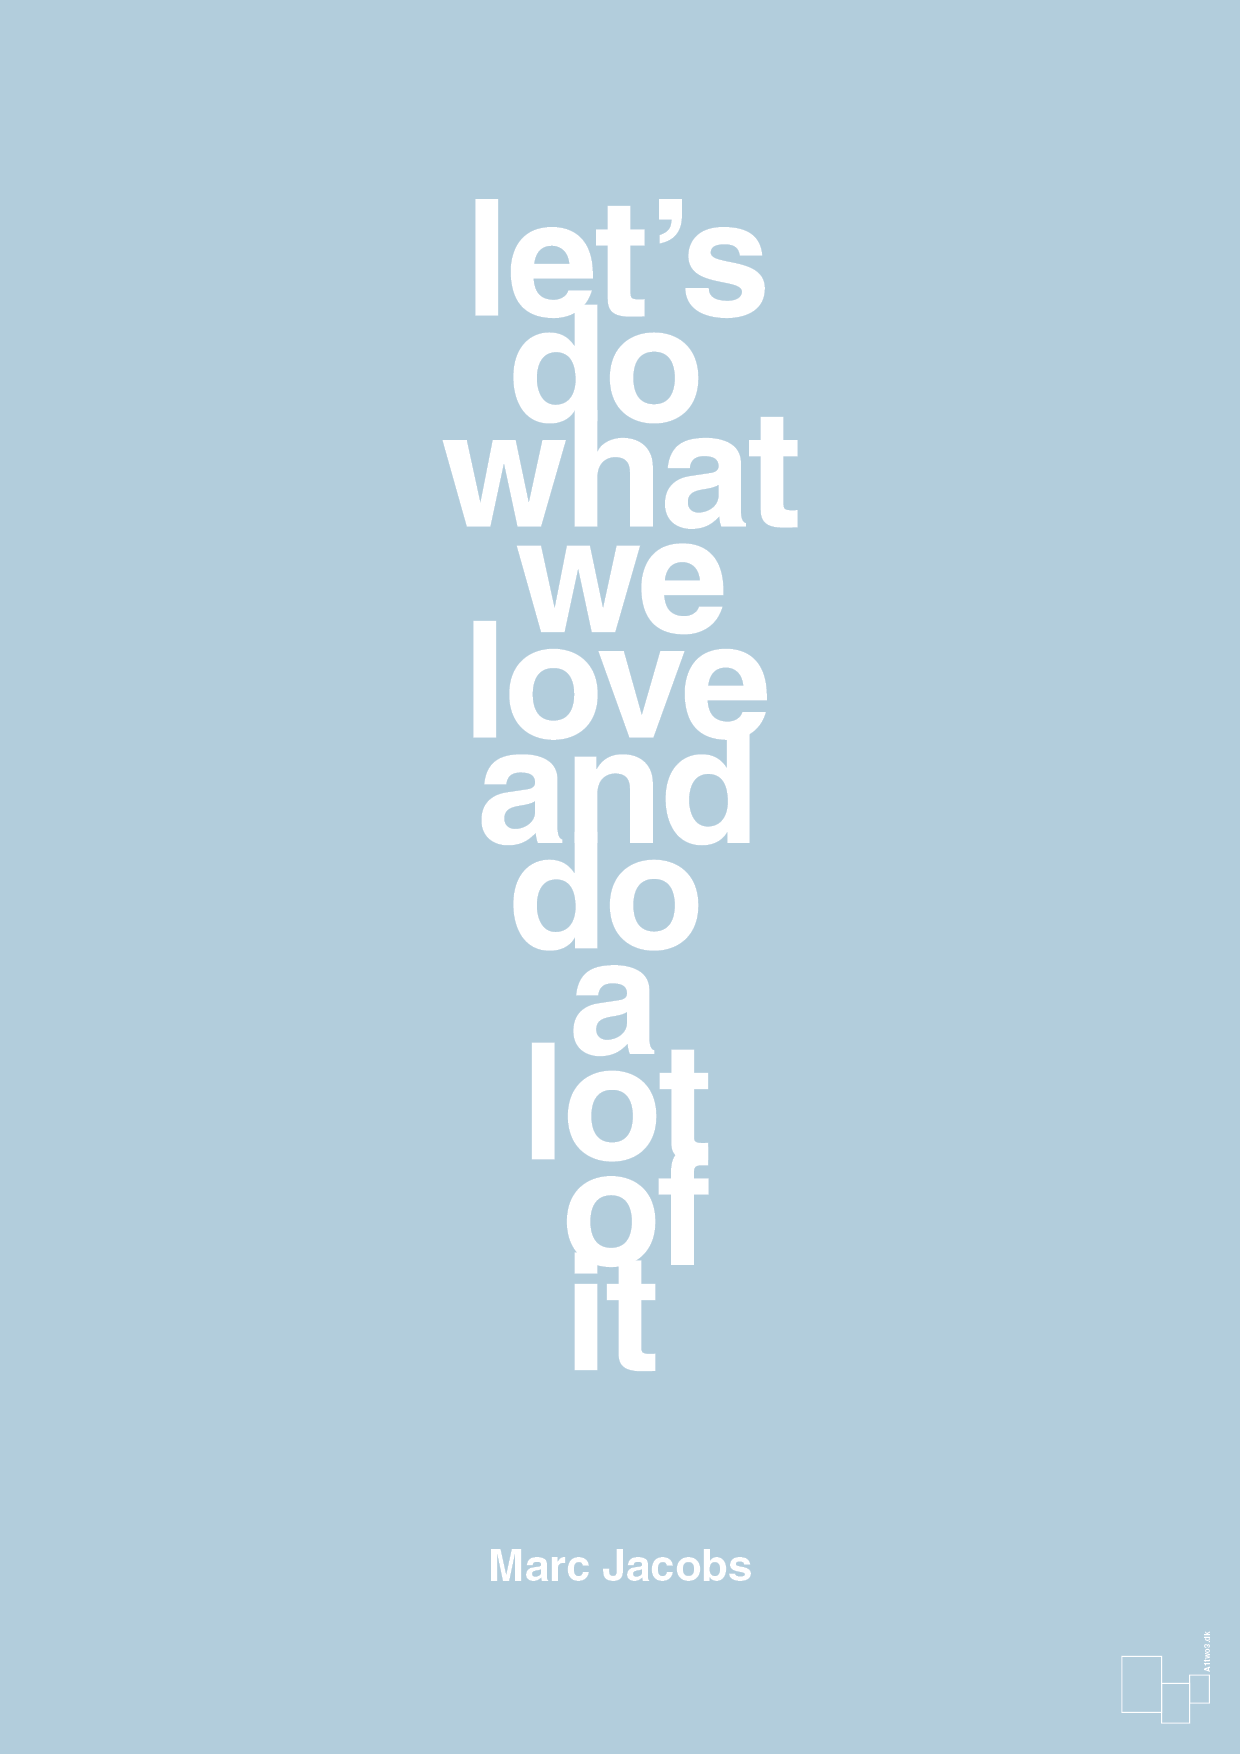 lets do what we love and do a lot of it - Plakat med Citater i Heavenly Blue